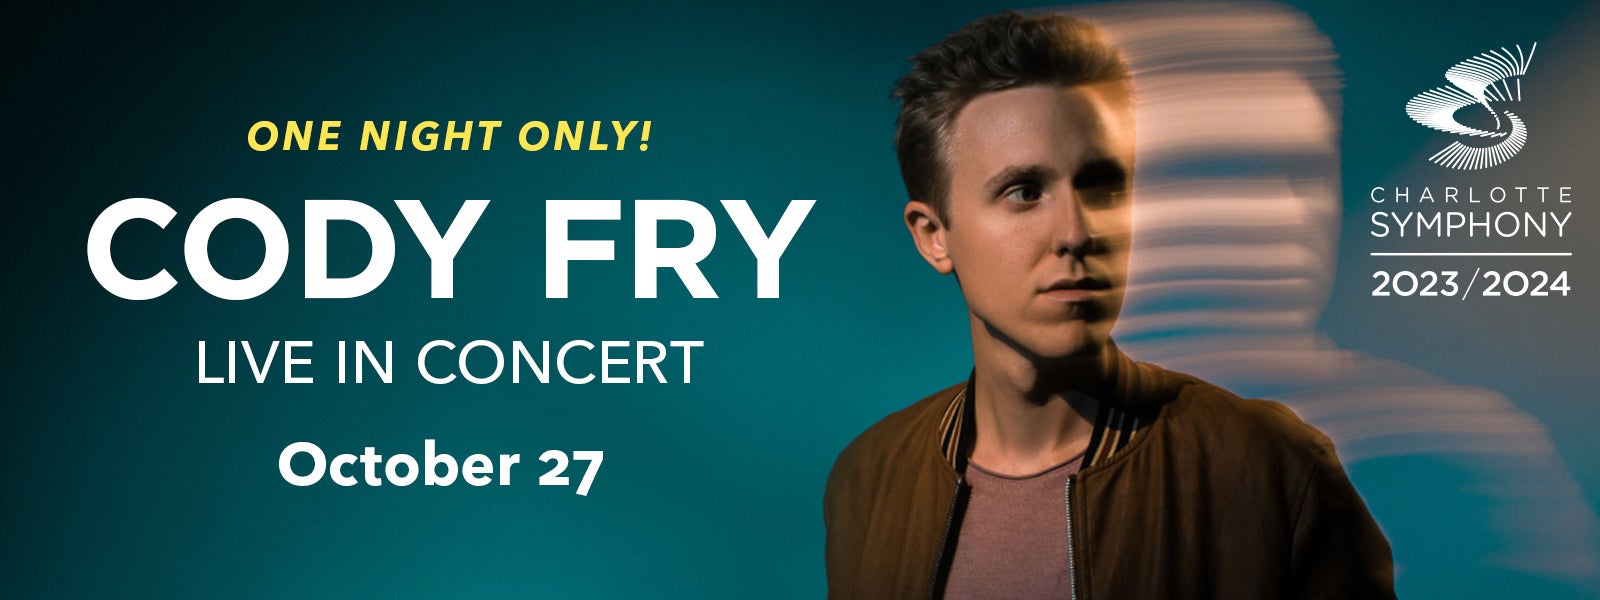 Charlotte Symphony Cody Fry Live in Concert Blumenthal Performing Arts